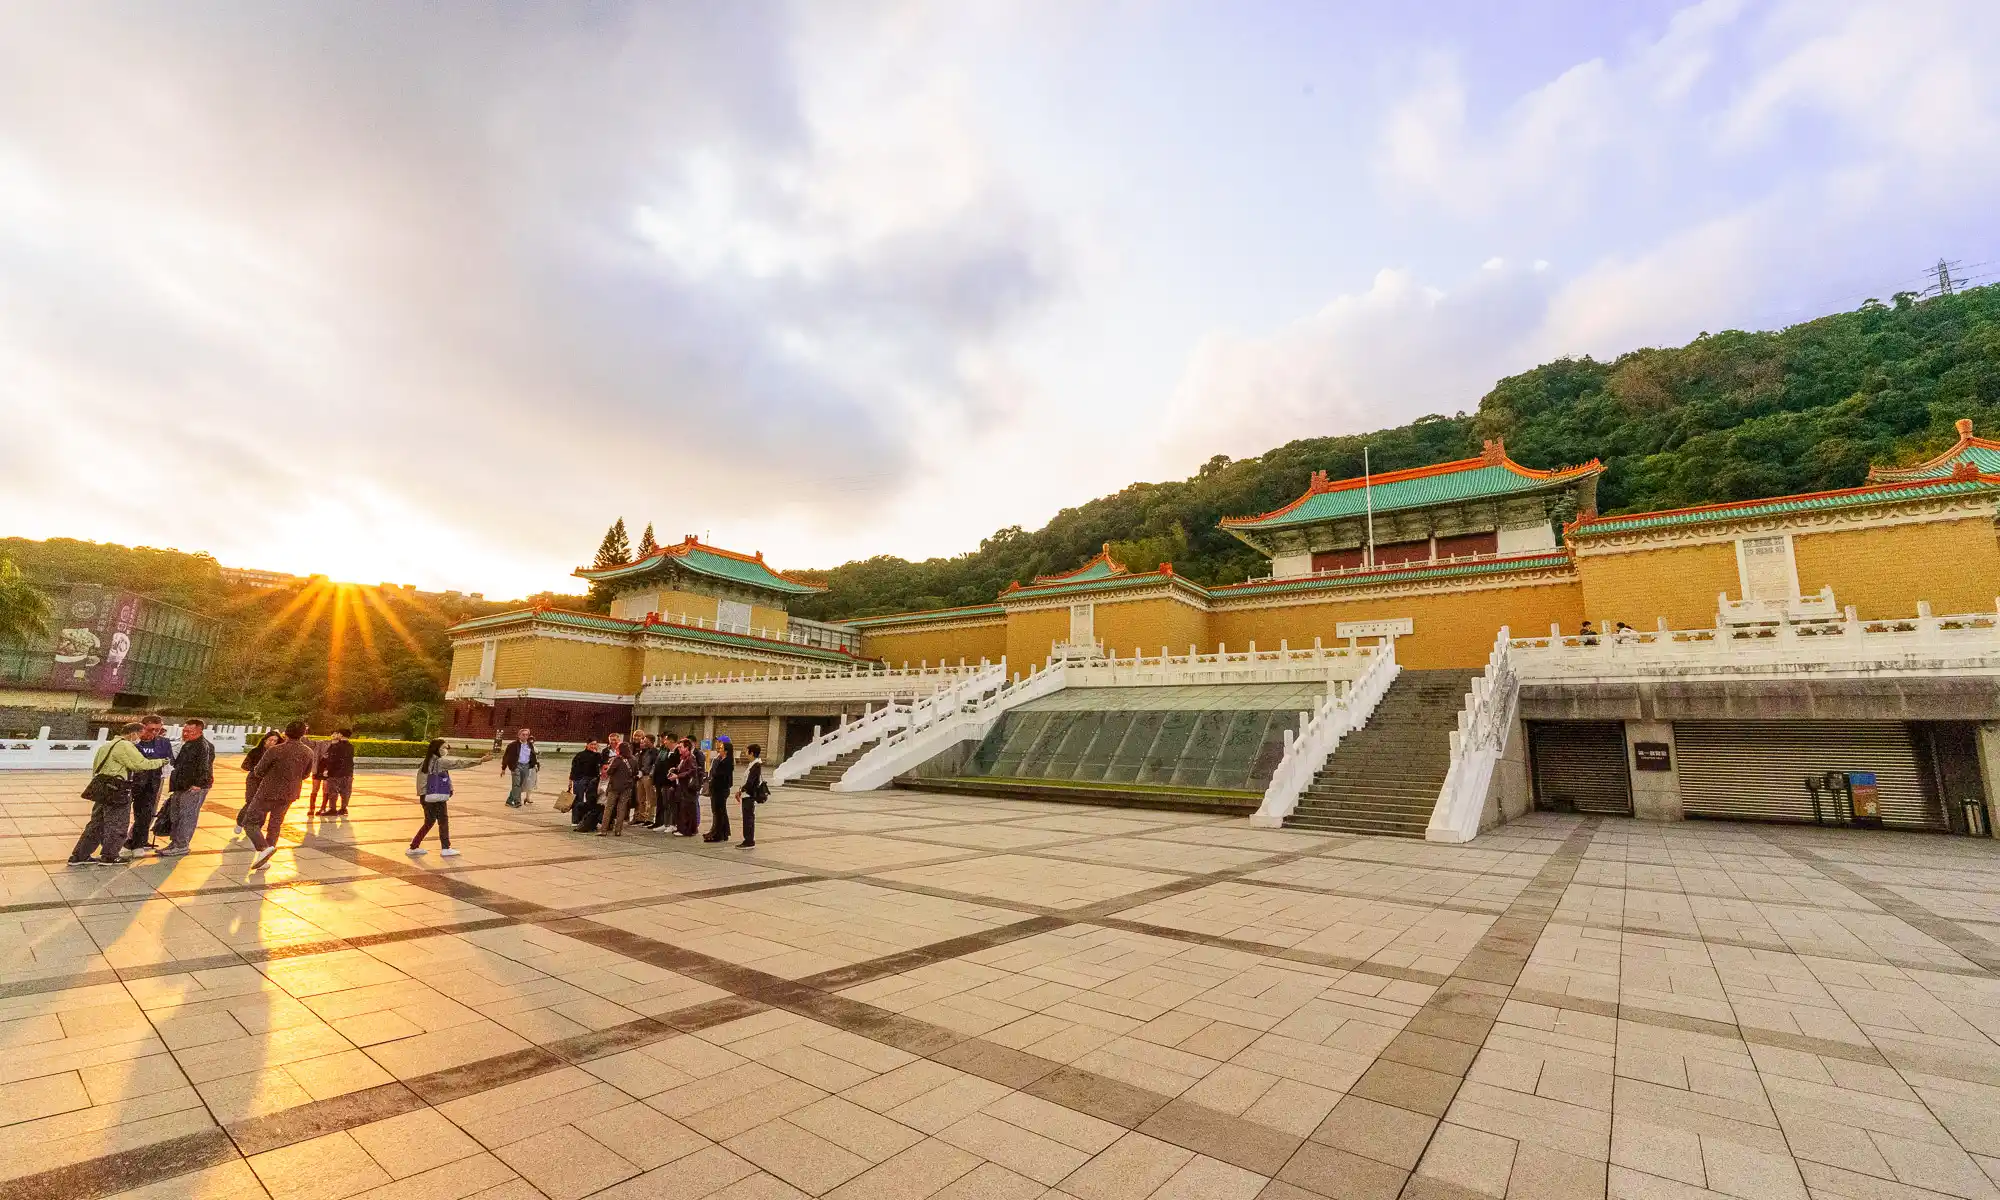 The sun sets behind the traditional architecture of the National Palace Museum while people walk through an expansive tiled plaza.